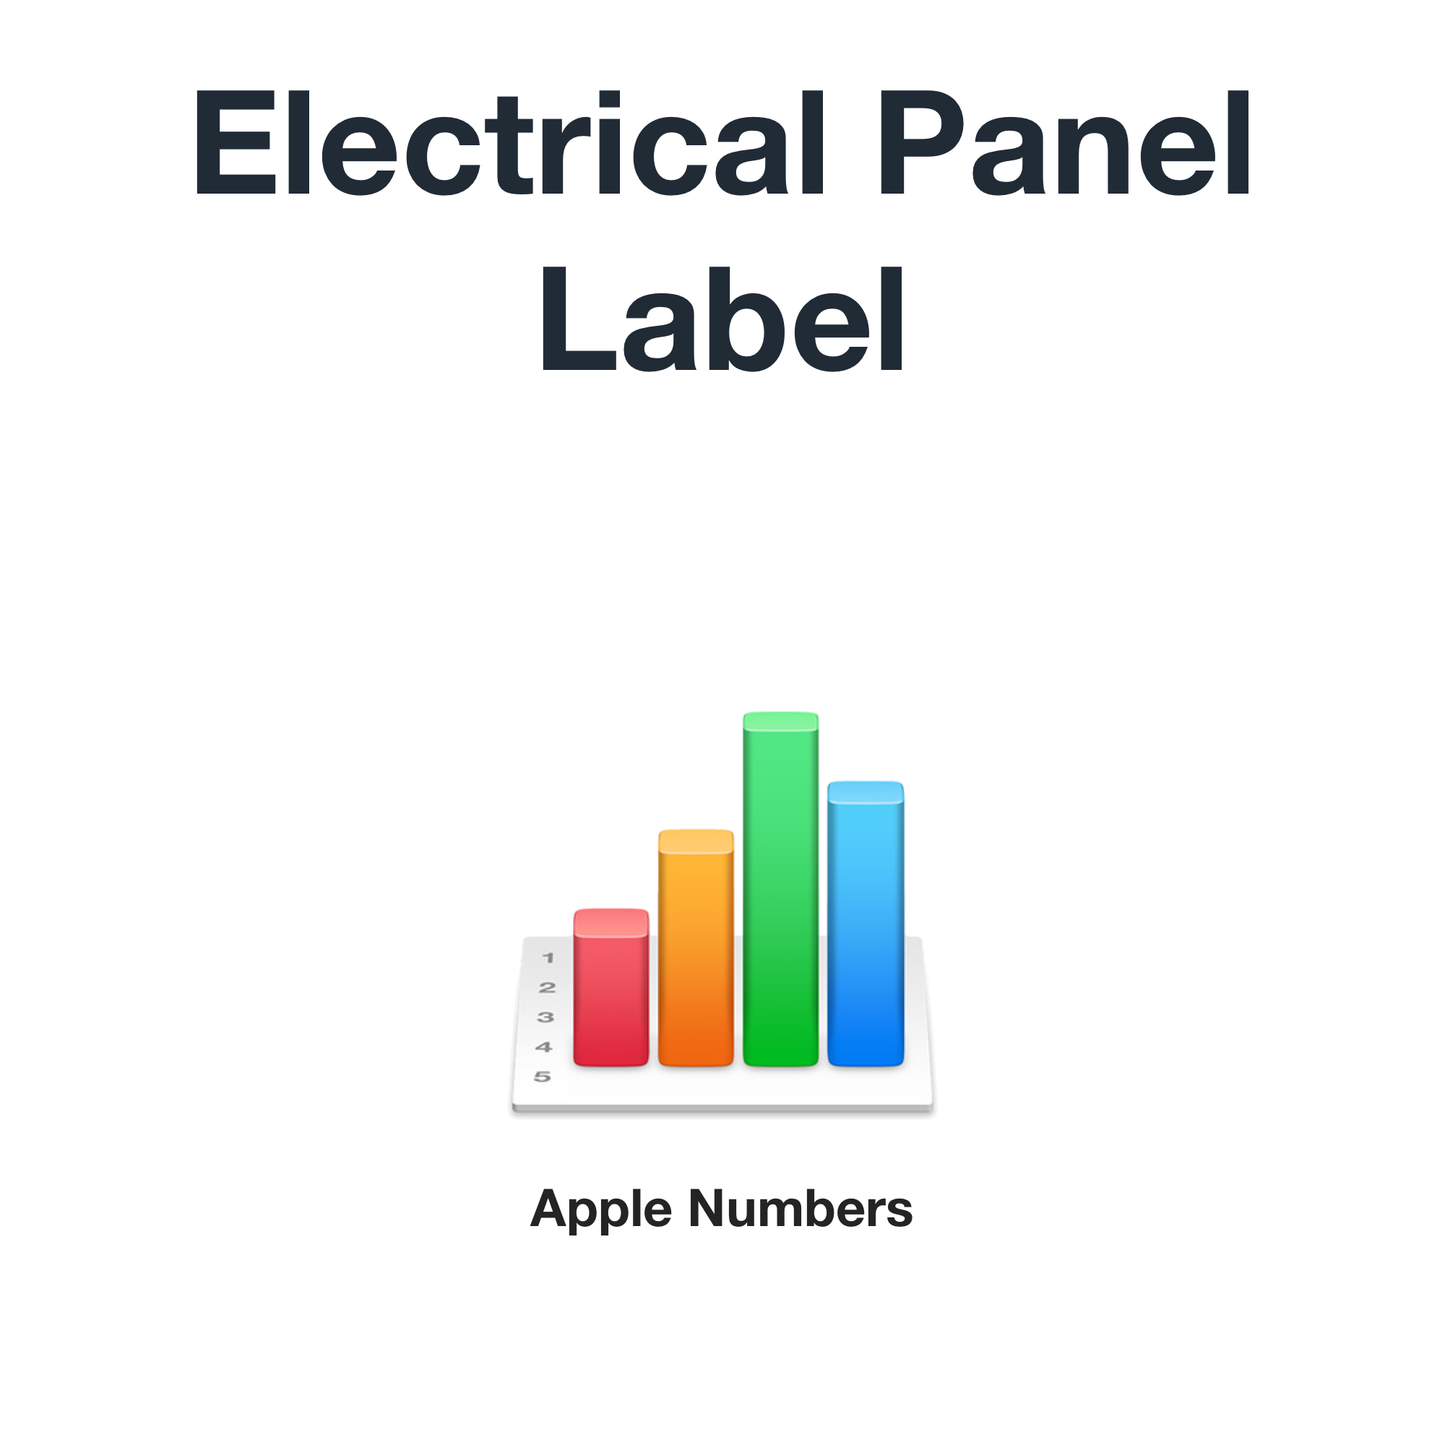 Electrical panel label (Apple Numbers format)